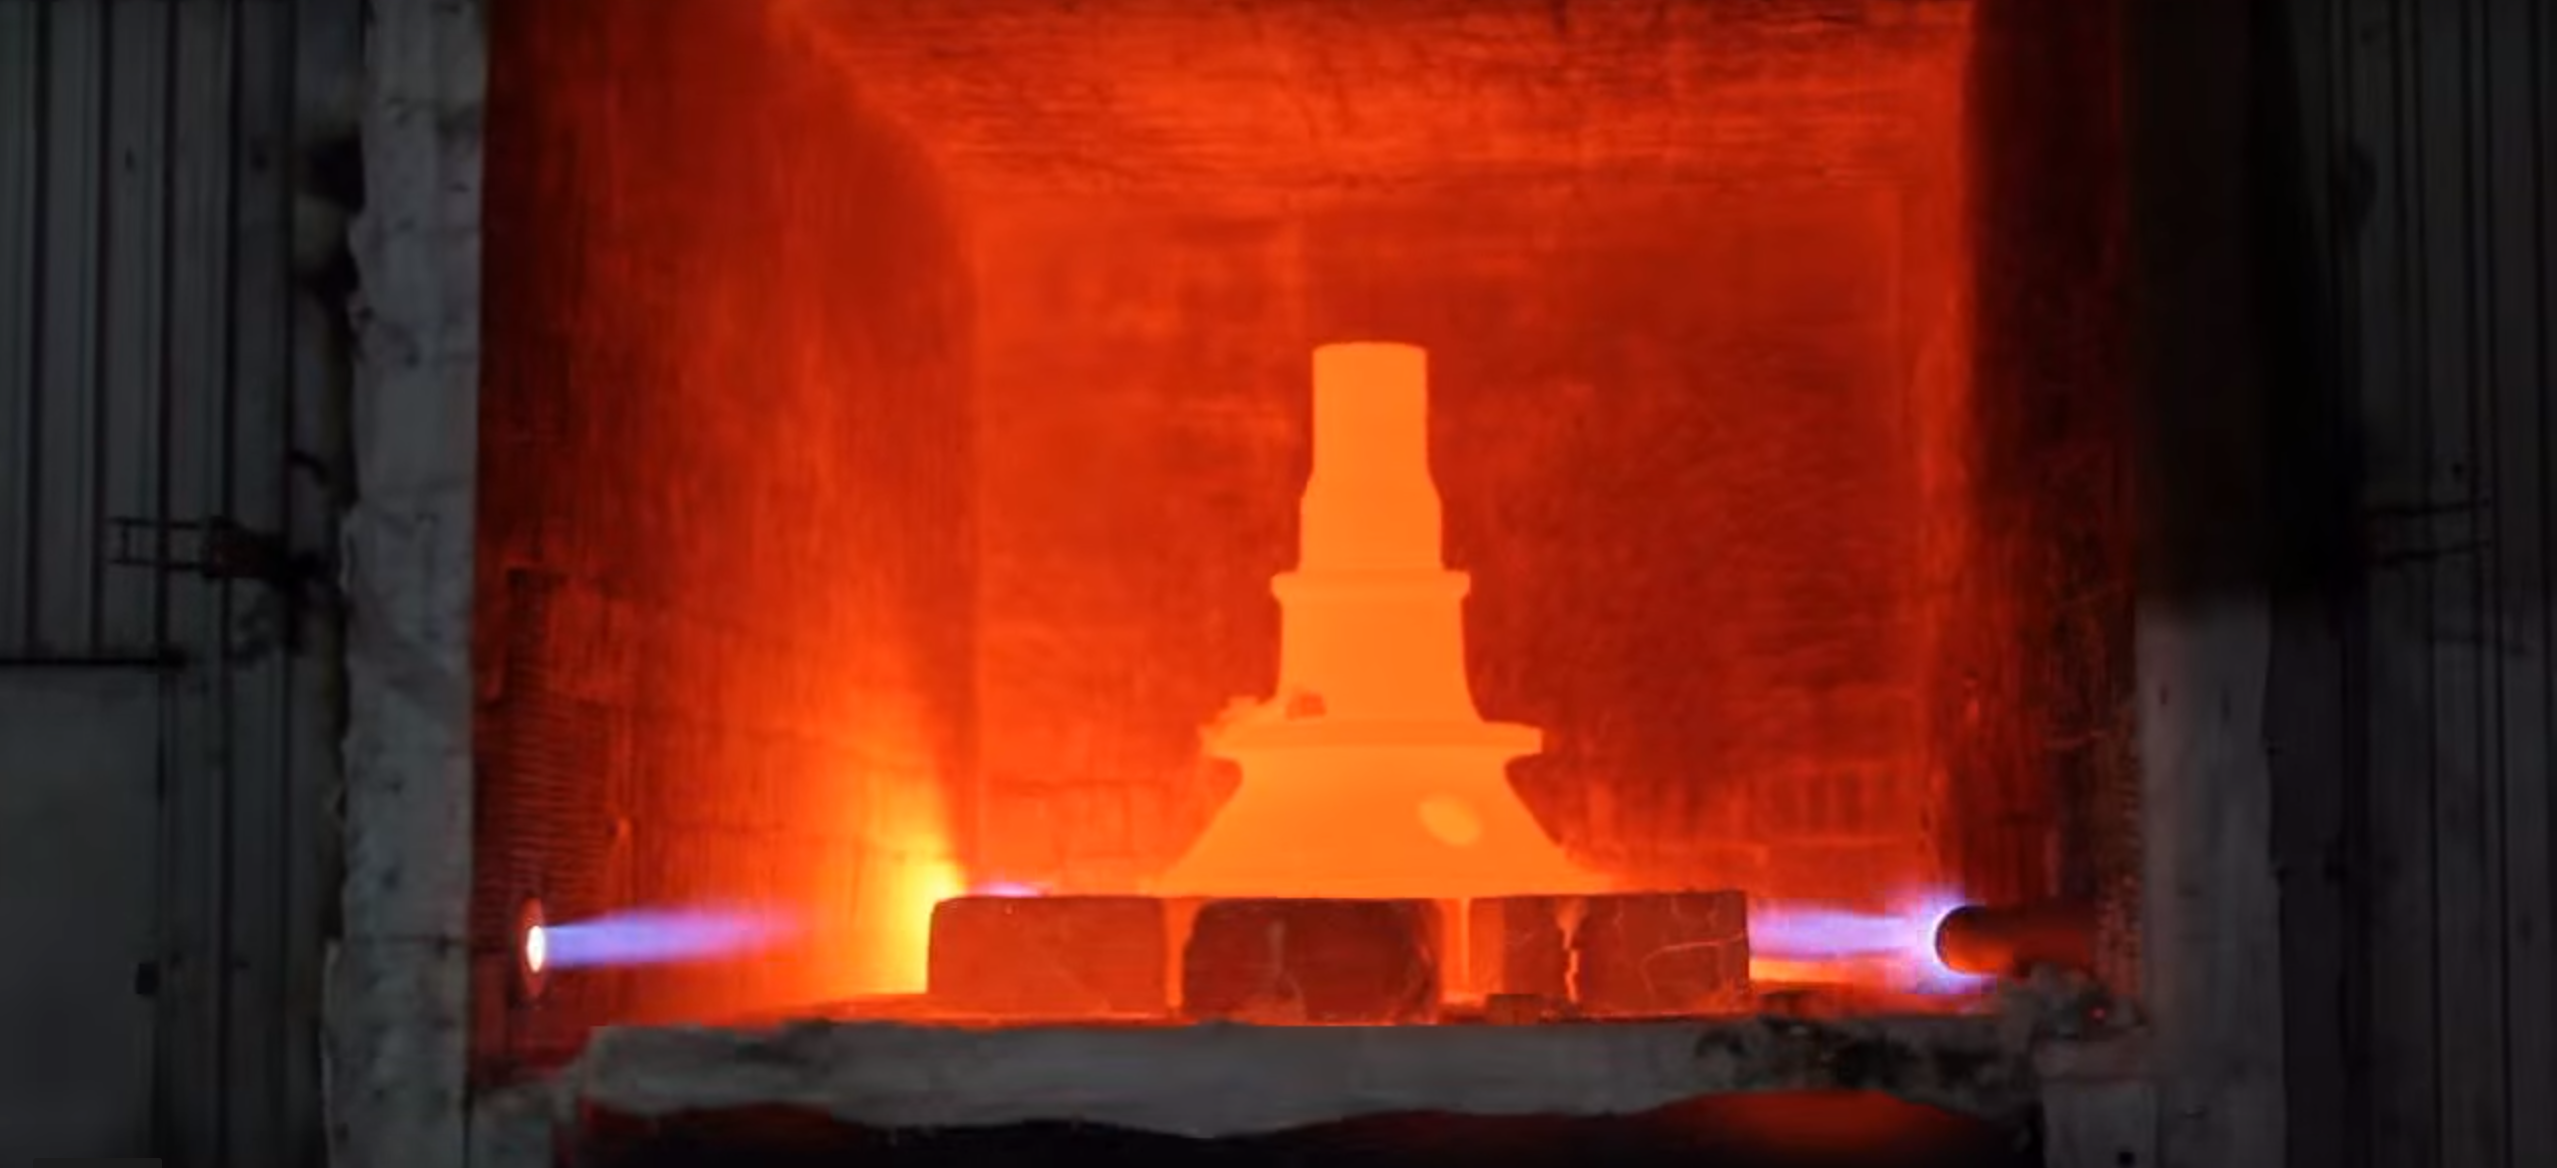 Steel part being heated in high temperature industrial furnace